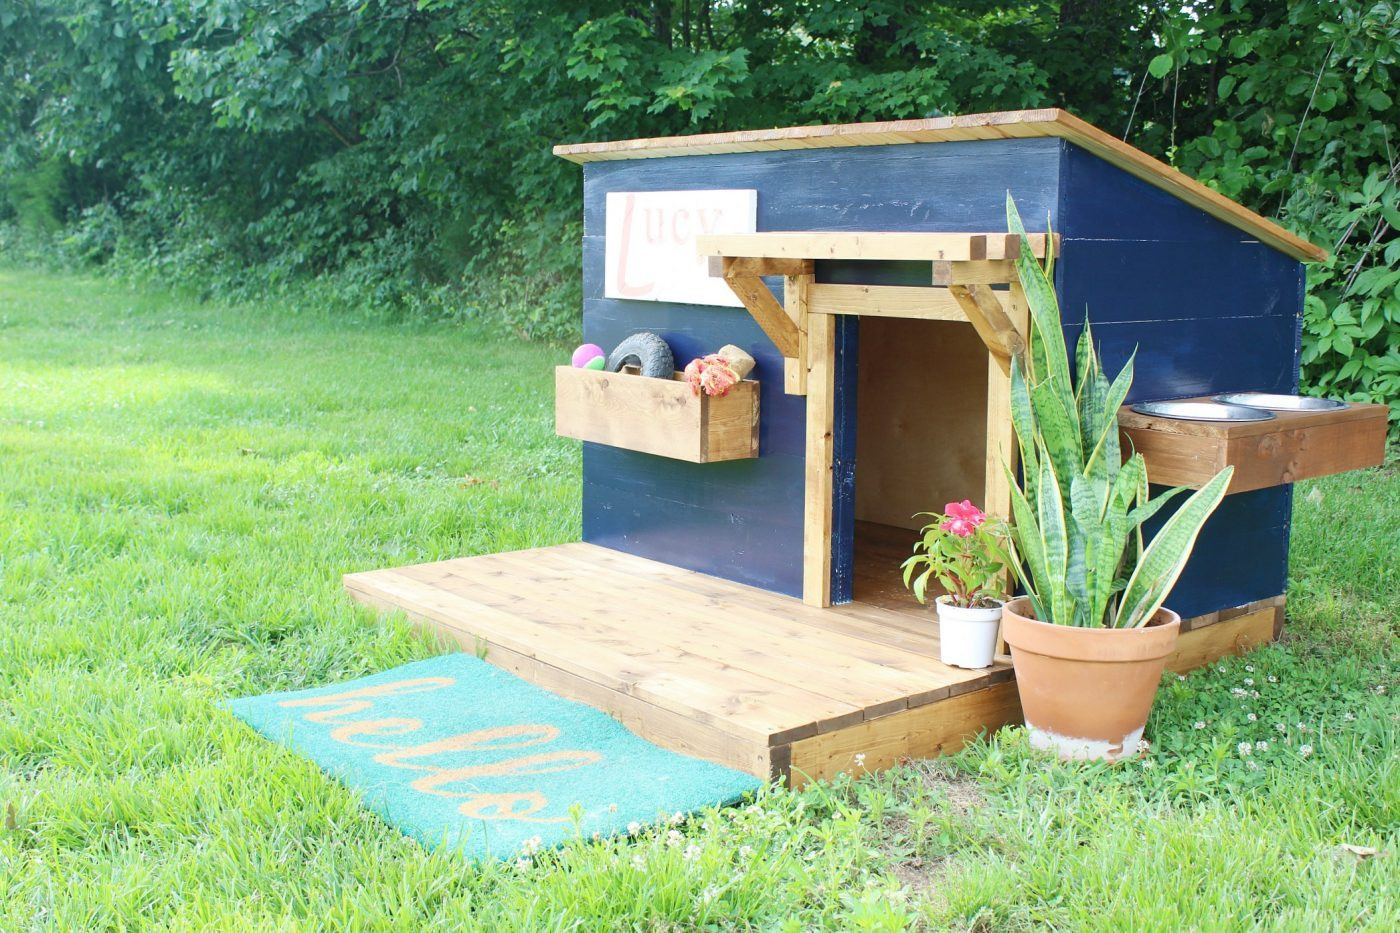 DIY Dog House Ideas
 DIY Doghouse with Deck Toy Box and Food Bowl